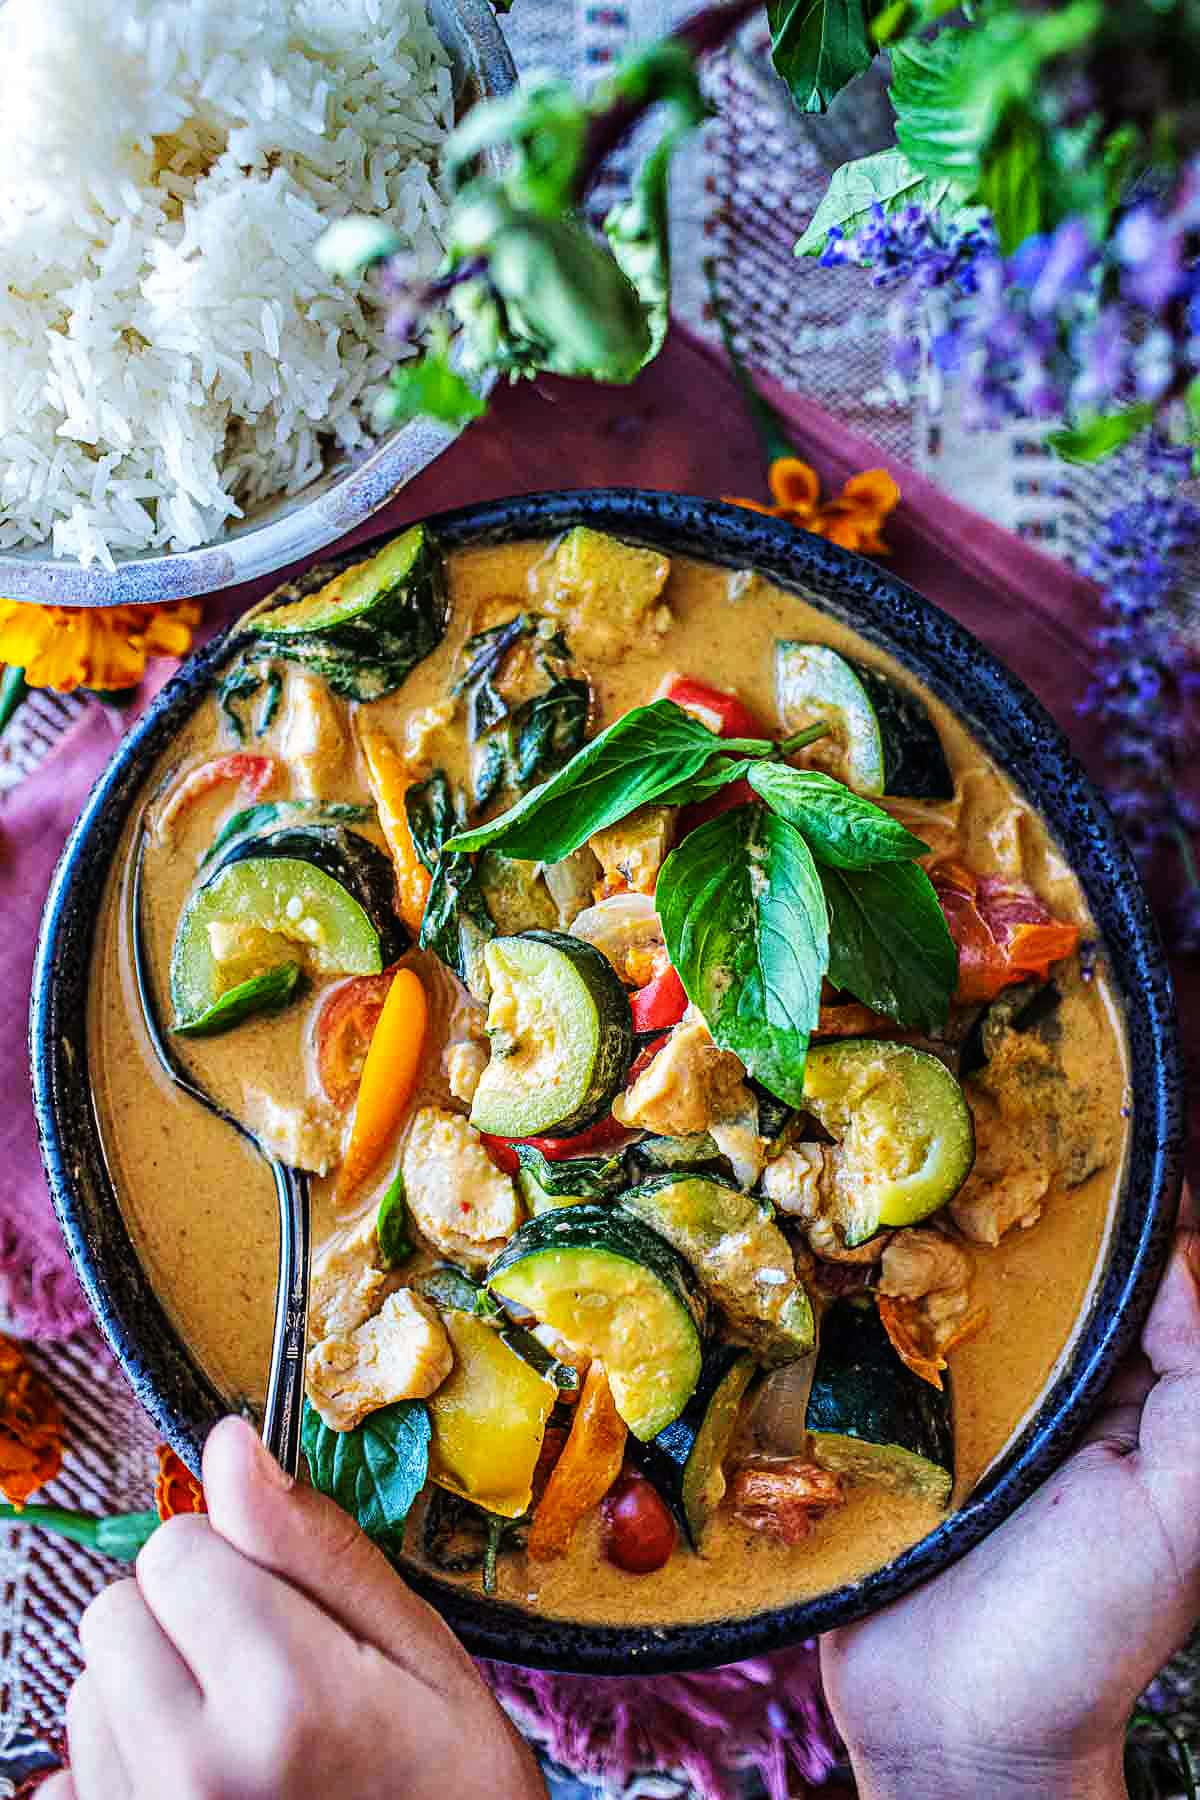 Zucchini Curry is a delightful dish made with Thai red curry paste and coconut milk. It’s a quick and easy dinner - the perfect meal for end-of-summer produce. Make this with chicken breast or Crispy Tofu.